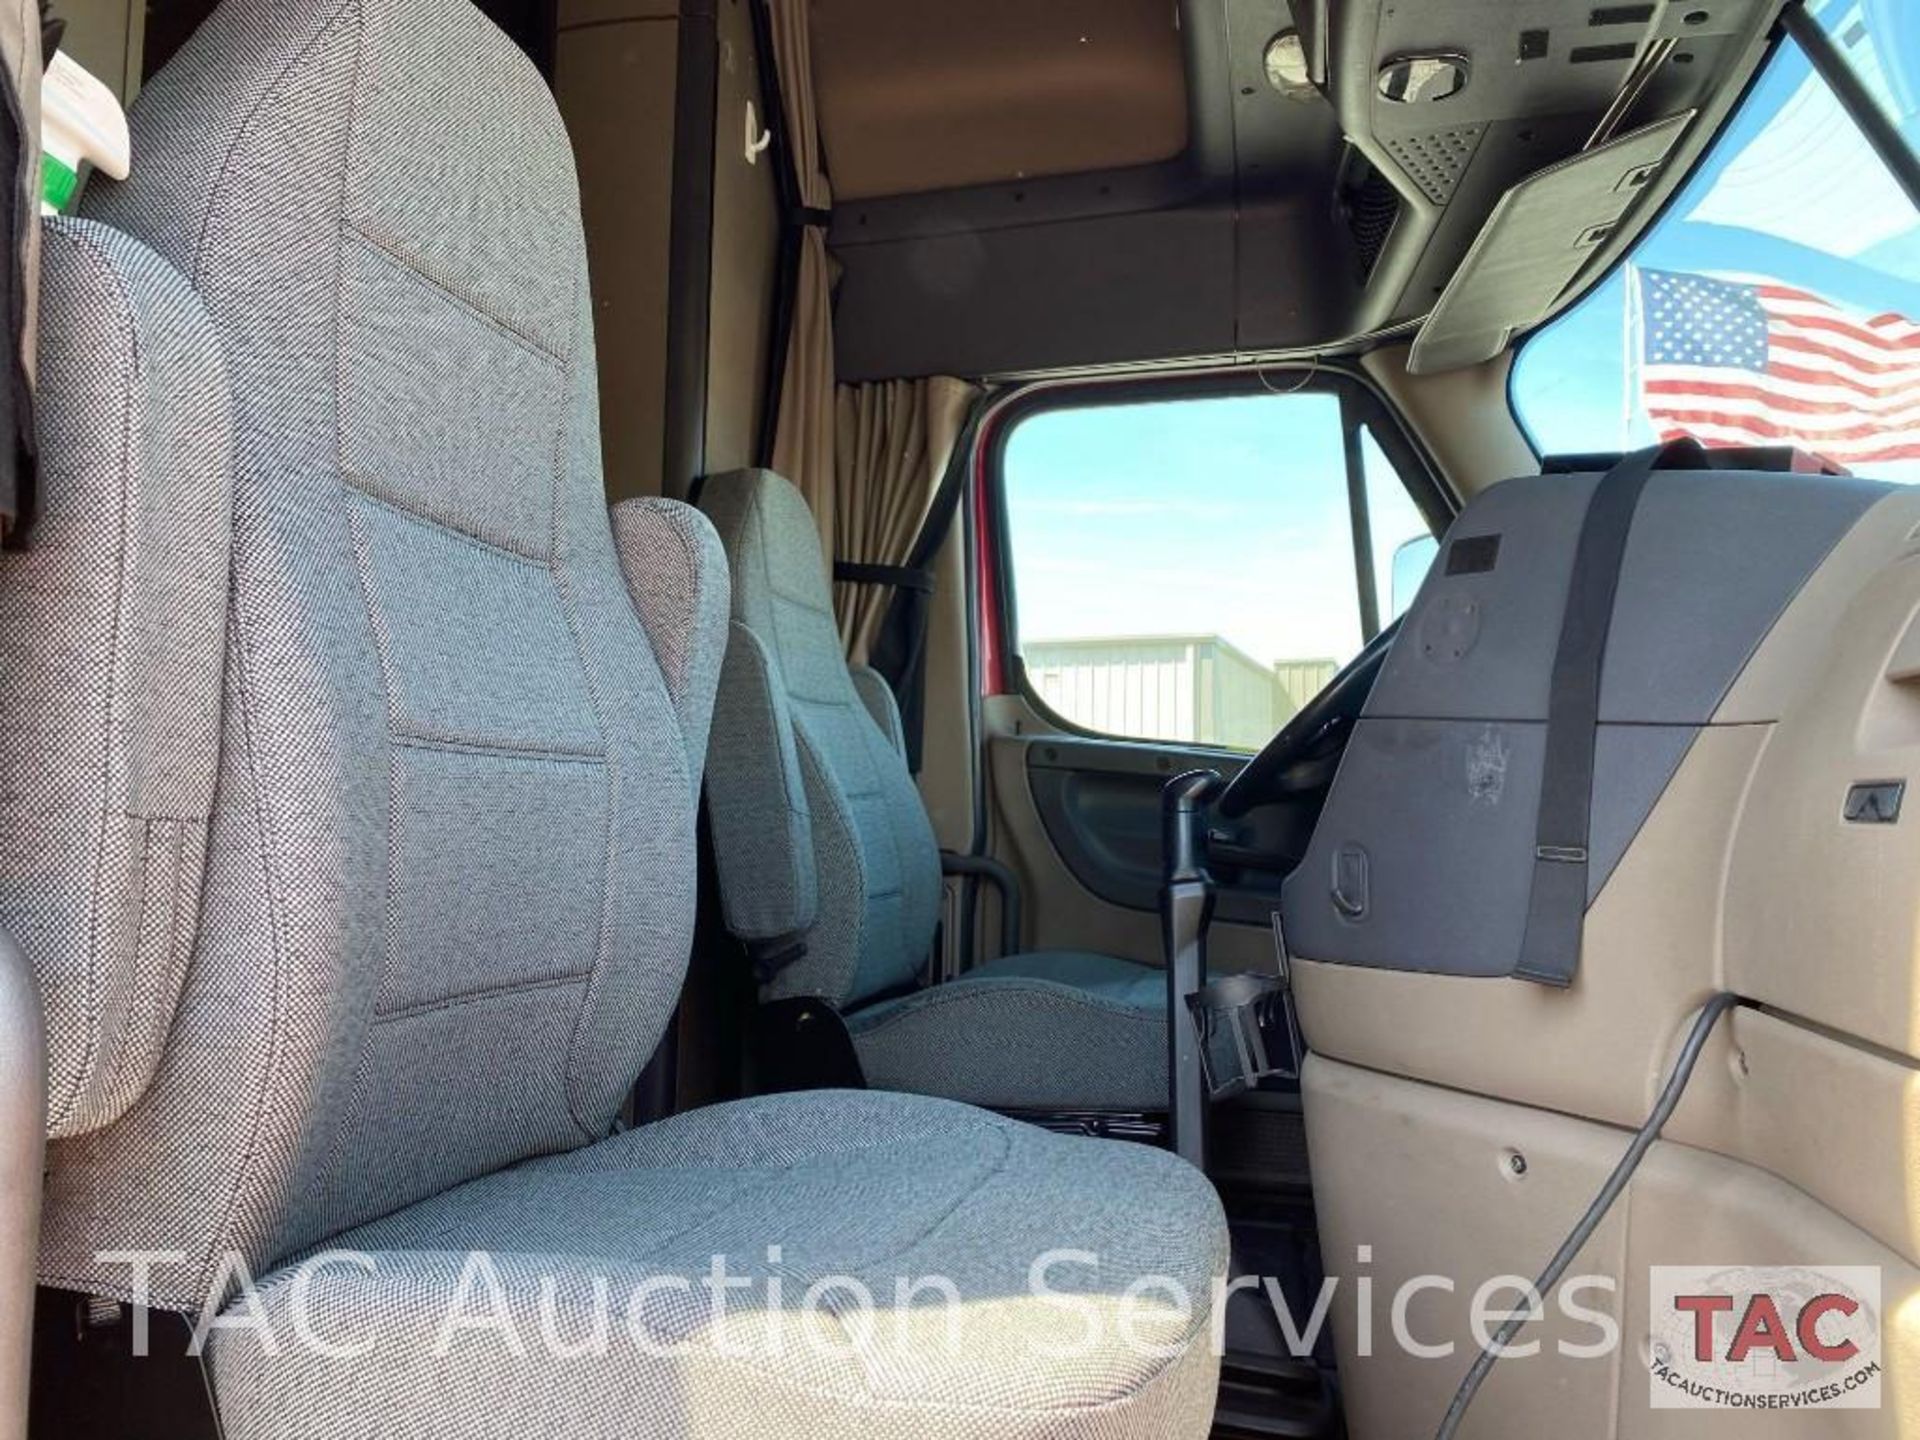 2013 Freightliner Cascadia - Image 40 of 79